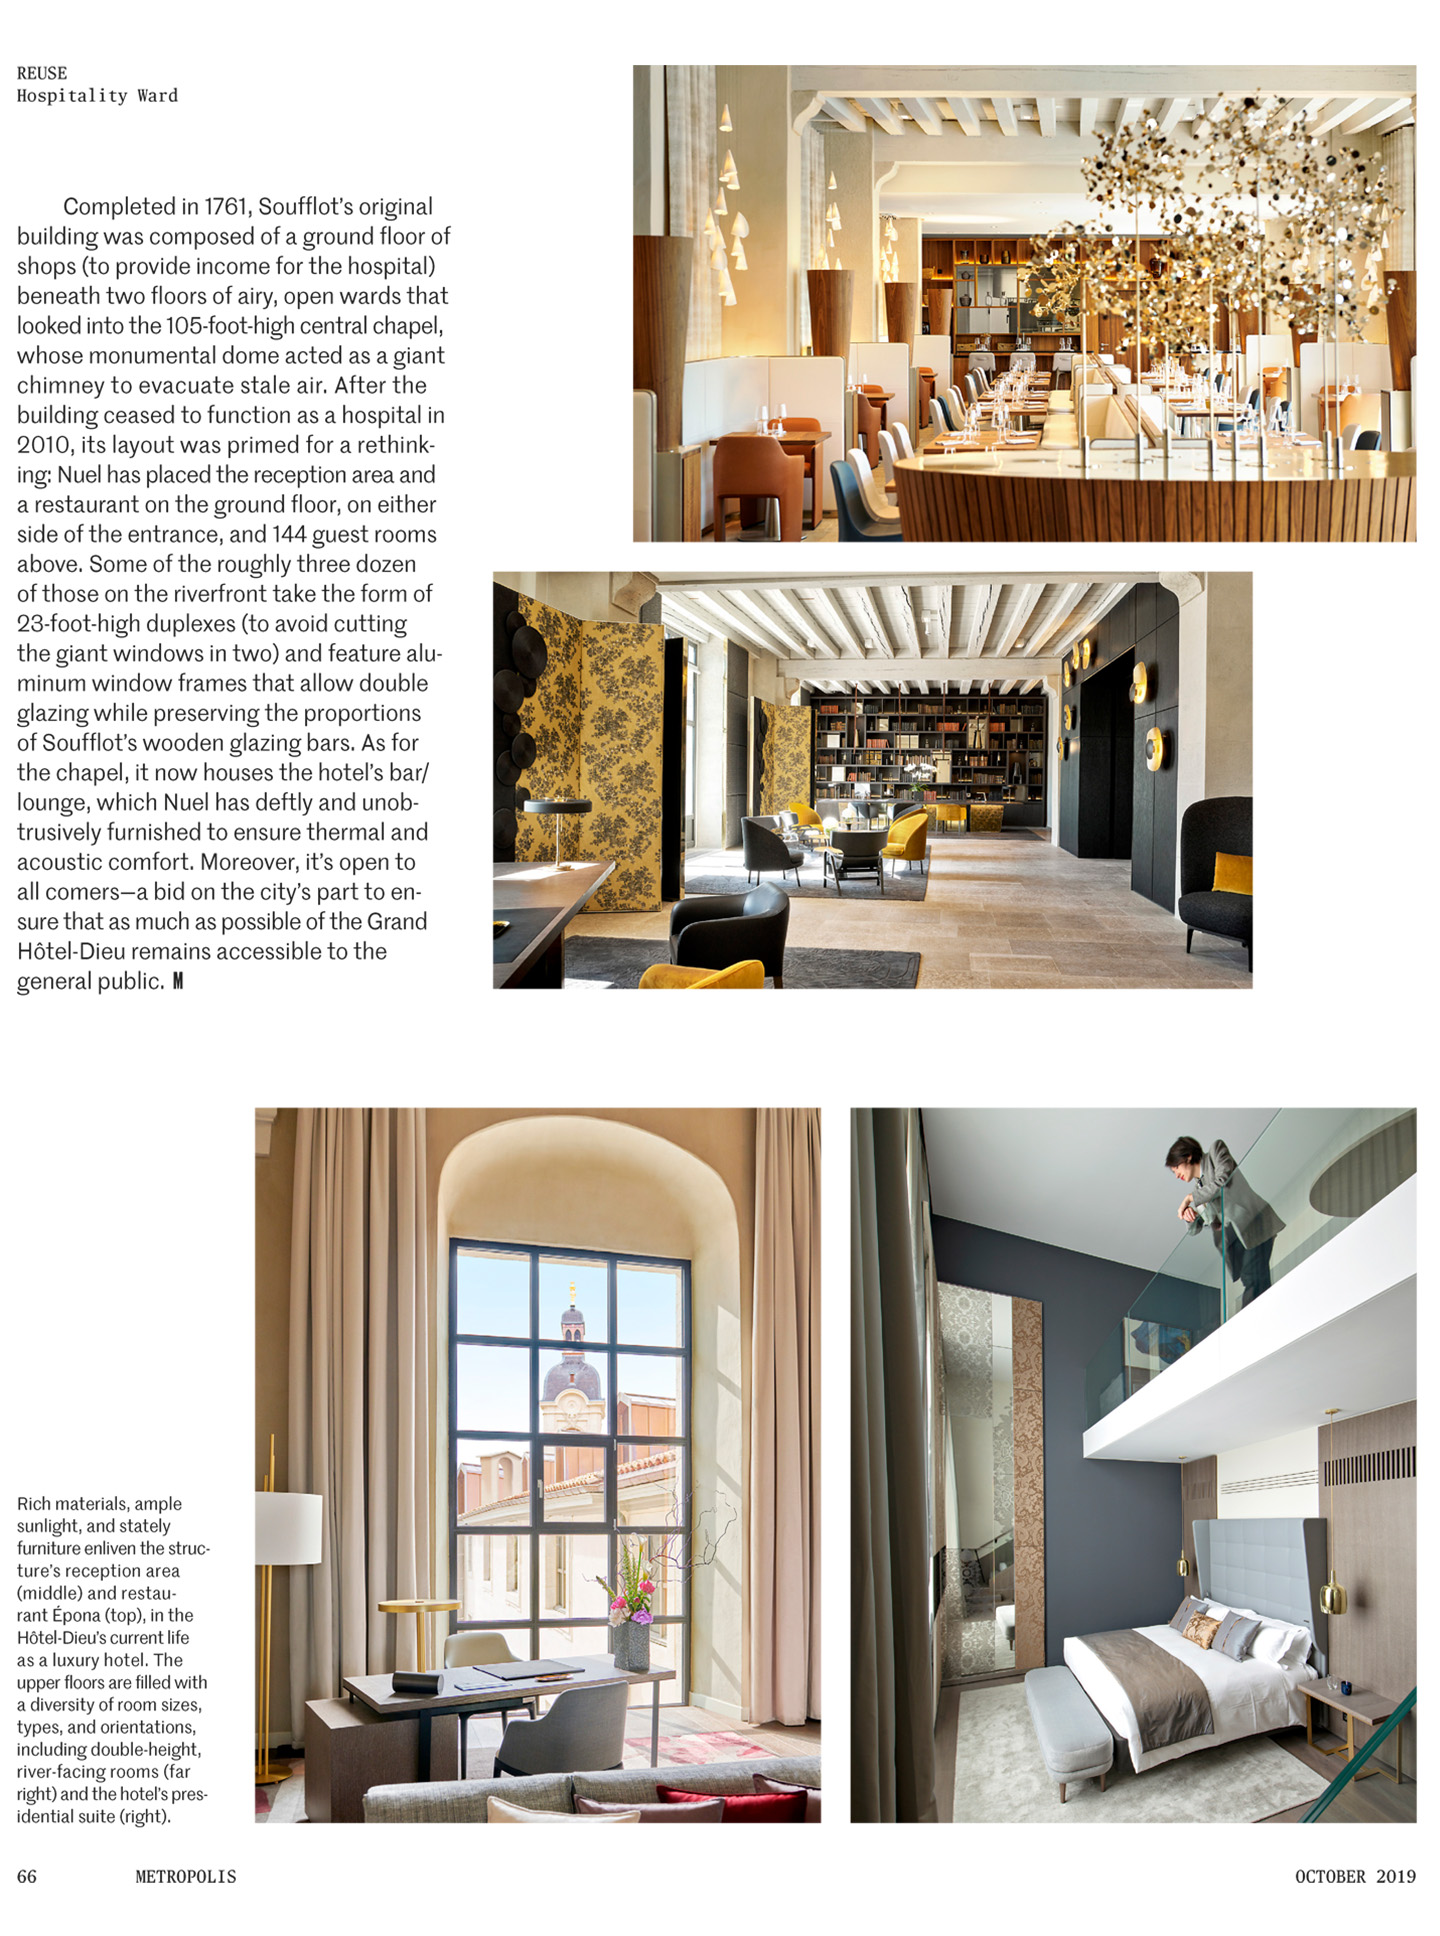 Article on the InterContinental Lyon Hotel Dieu realized by the studio jean-Philippe Nuel in the magazine Metropolis, new luxury hotel, luxury interior design, historical heritage